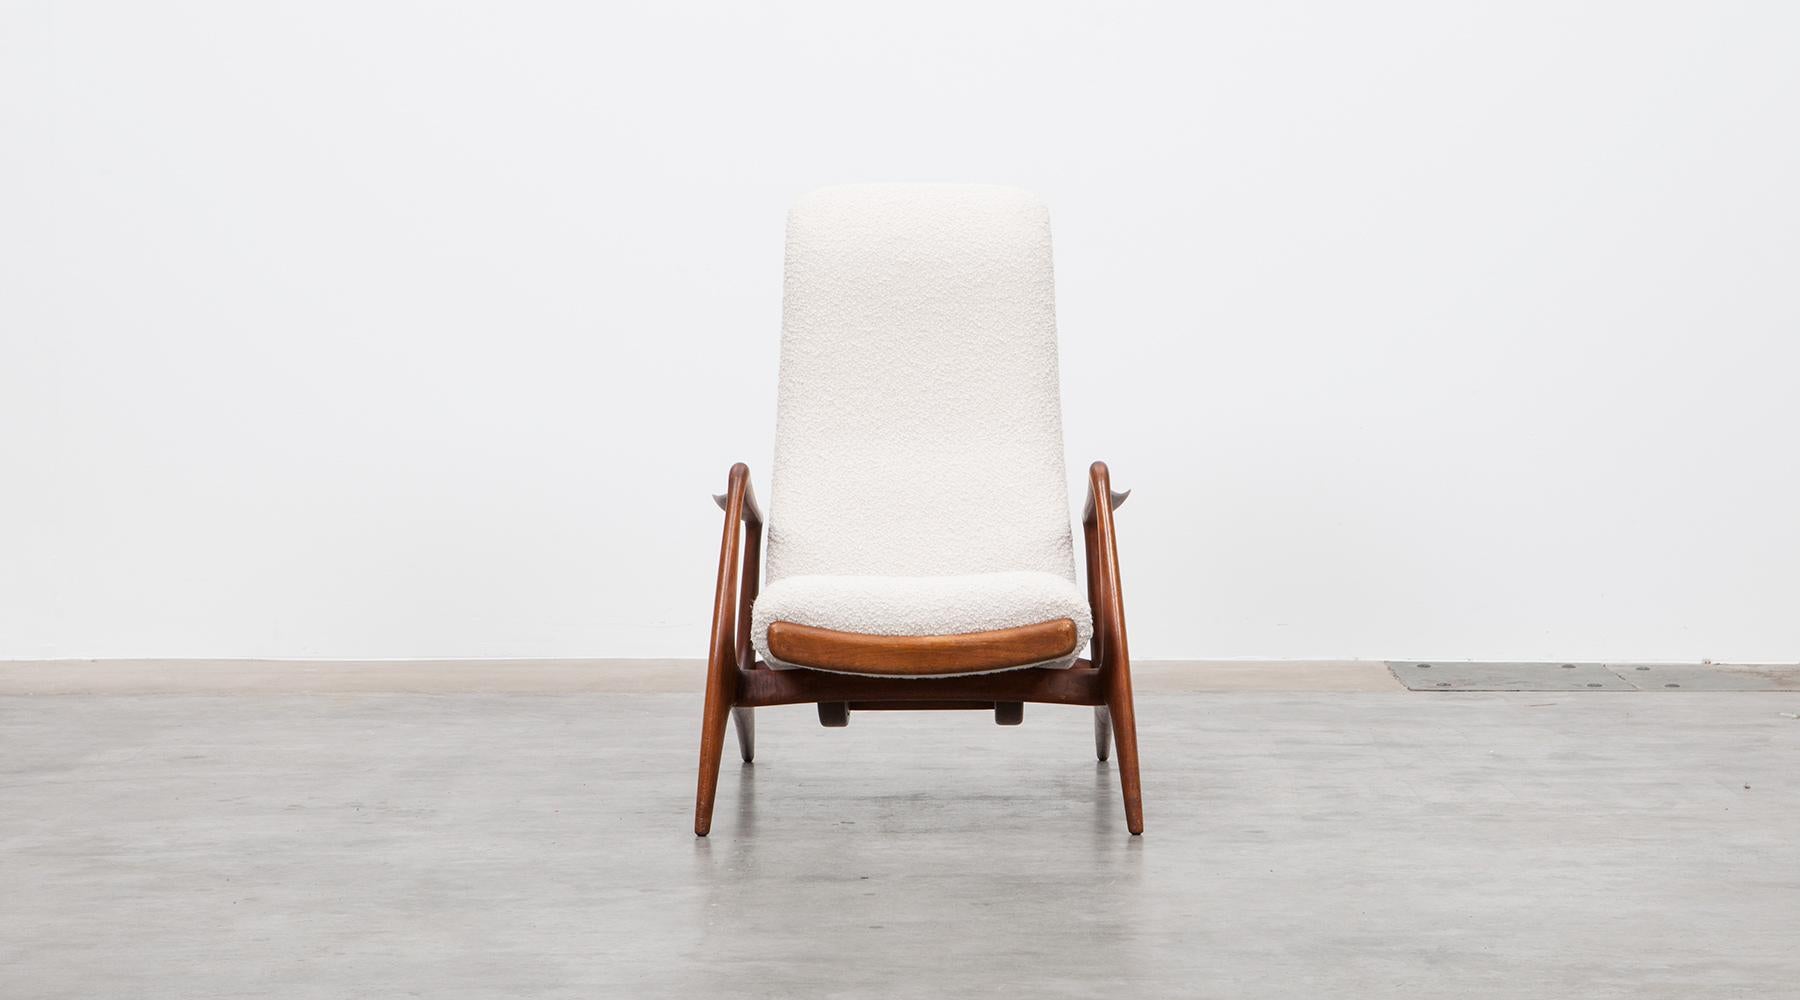 1950s Teak and White Upholstery Lounge Chair by Vladimir Kagan 2